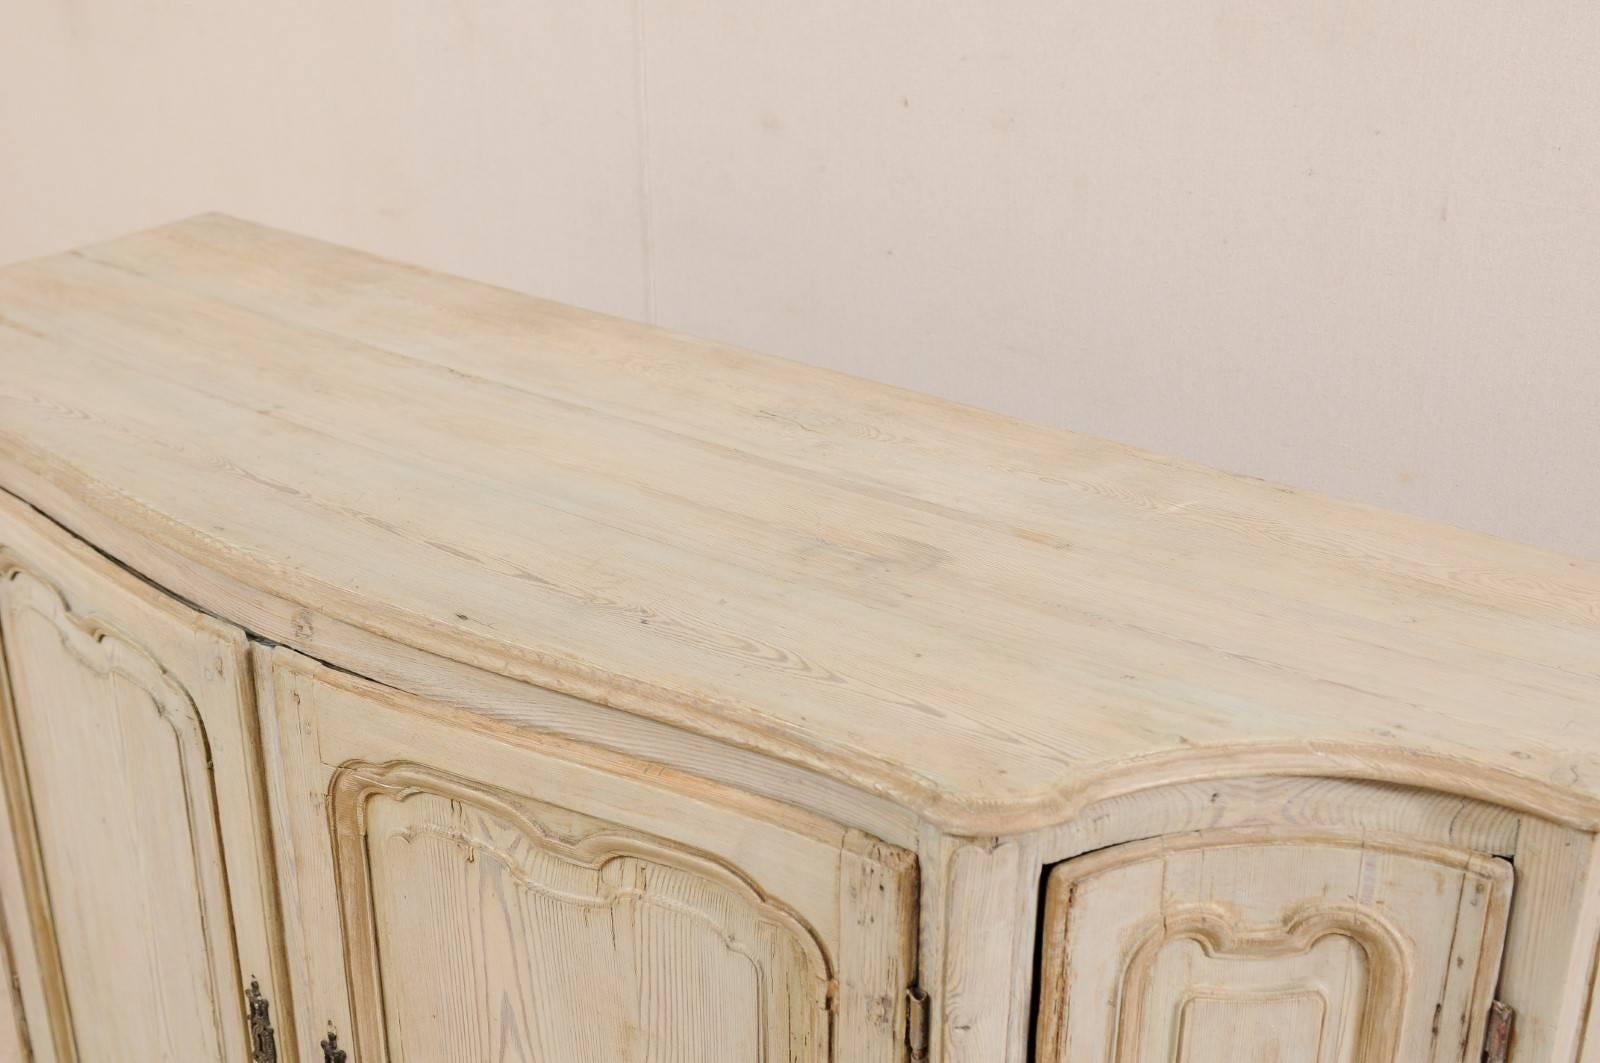 Carved French, 18th Century Painted Neutral Cream and Beige Colors Wood Buffet Cabinet